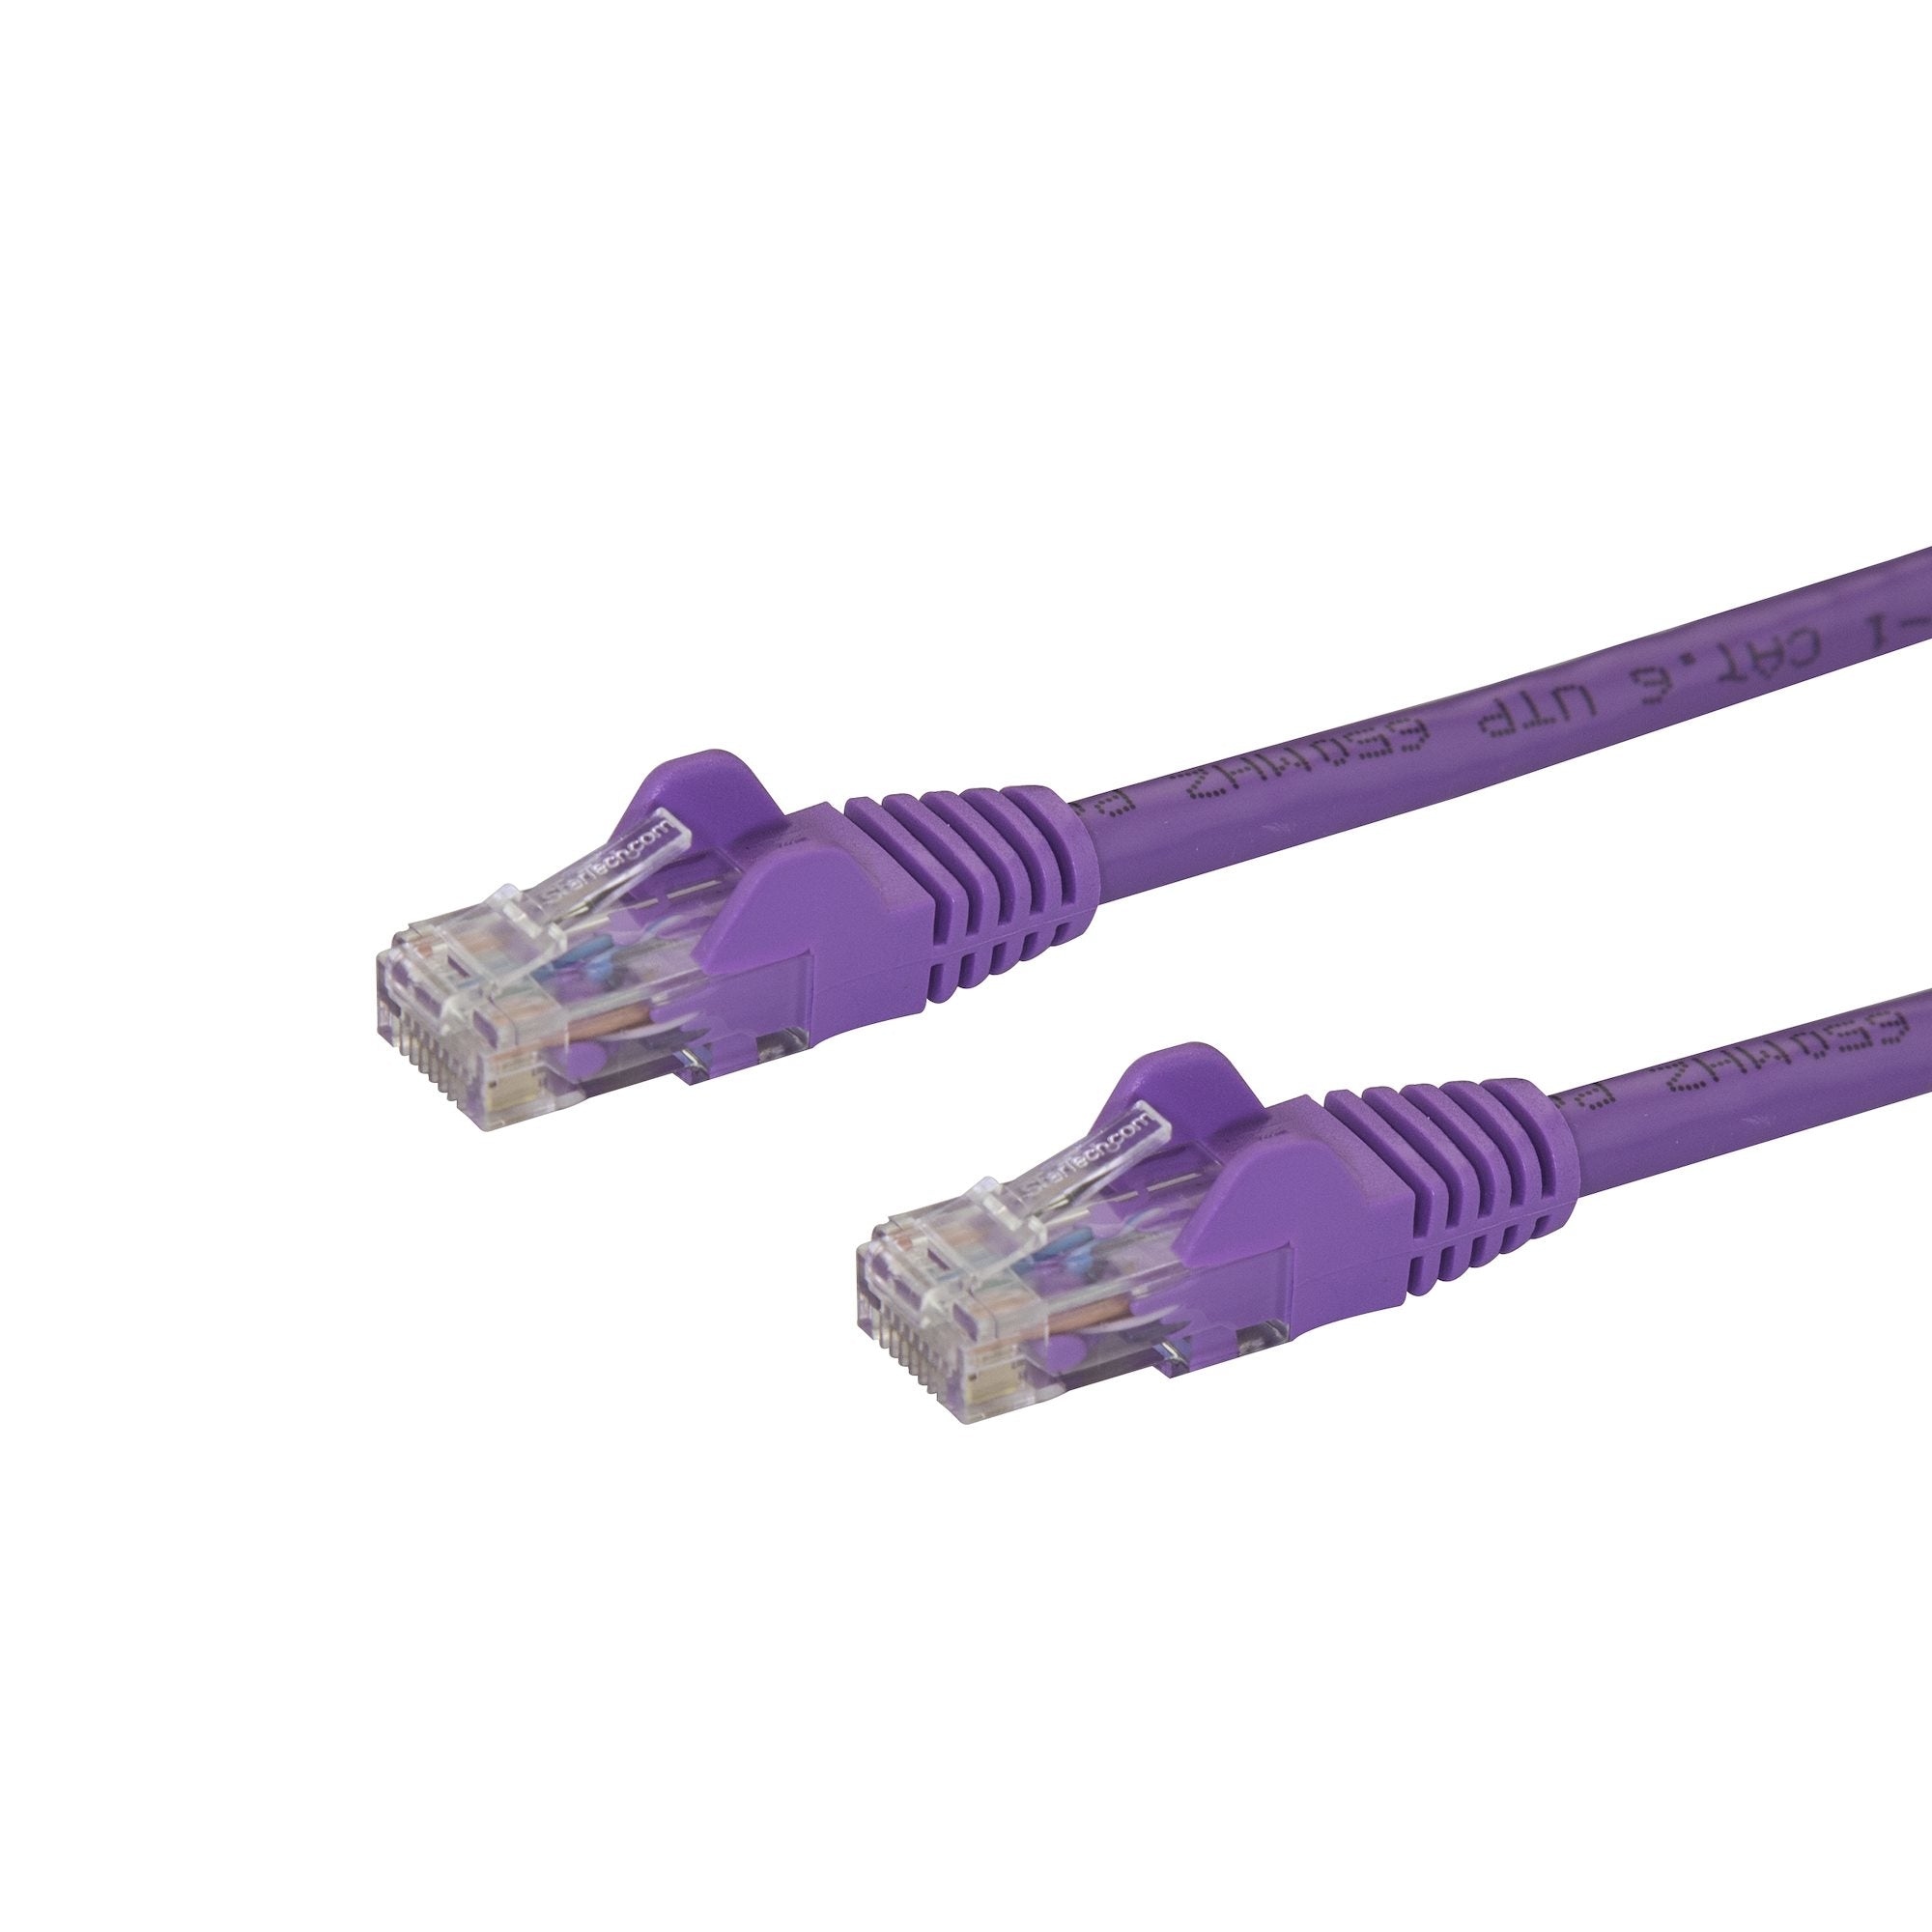 StarTech.com 75ft CAT6 Ethernet Cable - Purple CAT 6 Gigabit Ethernet Wire -650MHz 100W PoE RJ45 UTP Network/Patch Cord Snagless w/Strain Relief Fluke Tested/Wiring is UL Certified/TIA